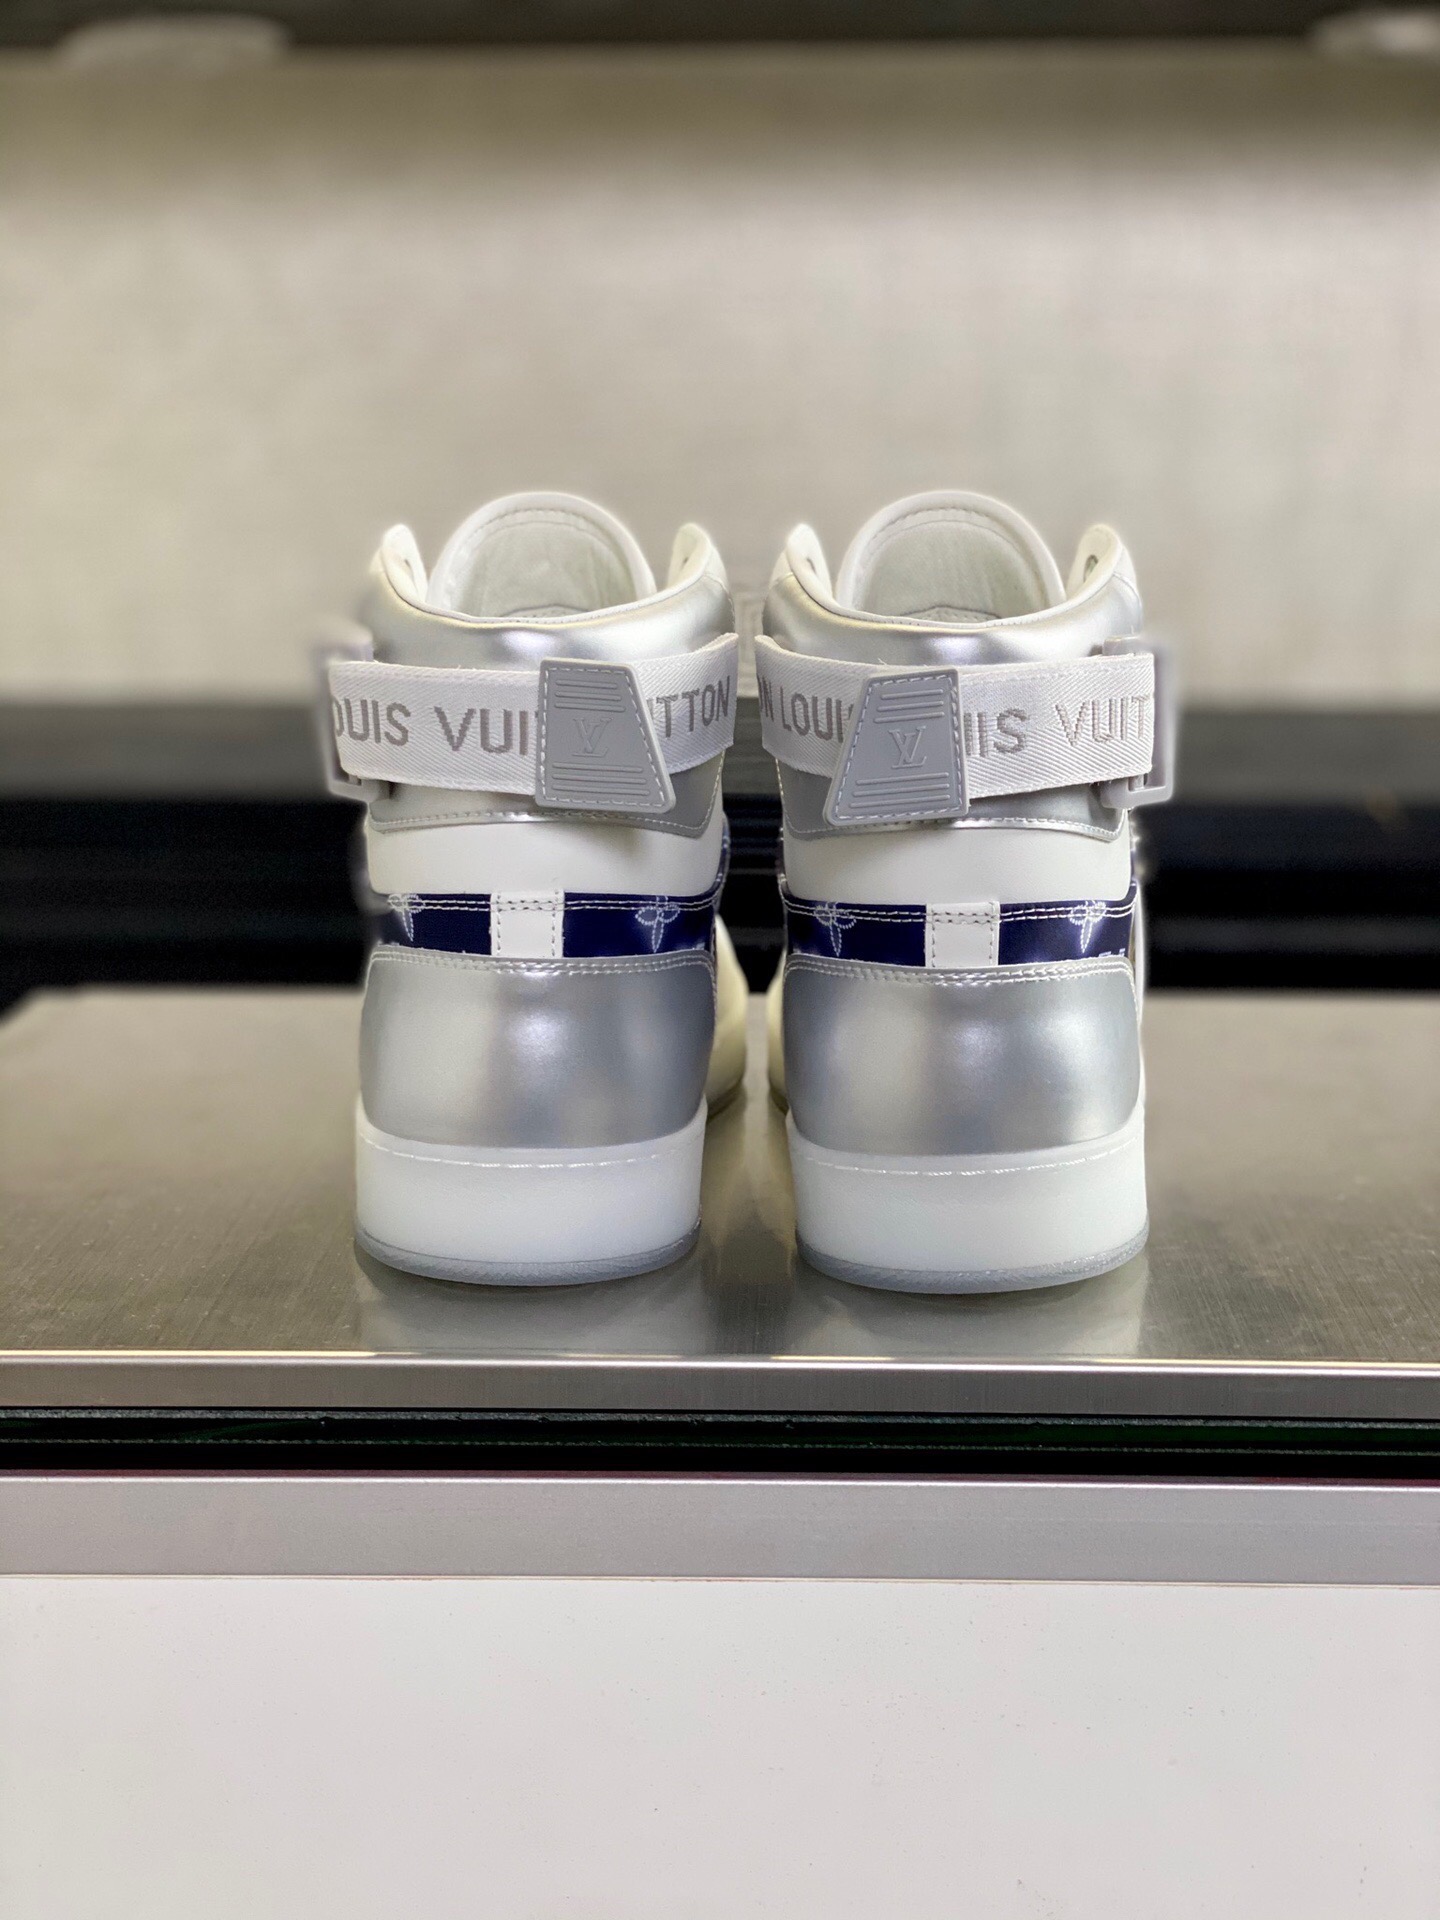 LV Trainer Sneaker 2022 New Arrival Top Quality 